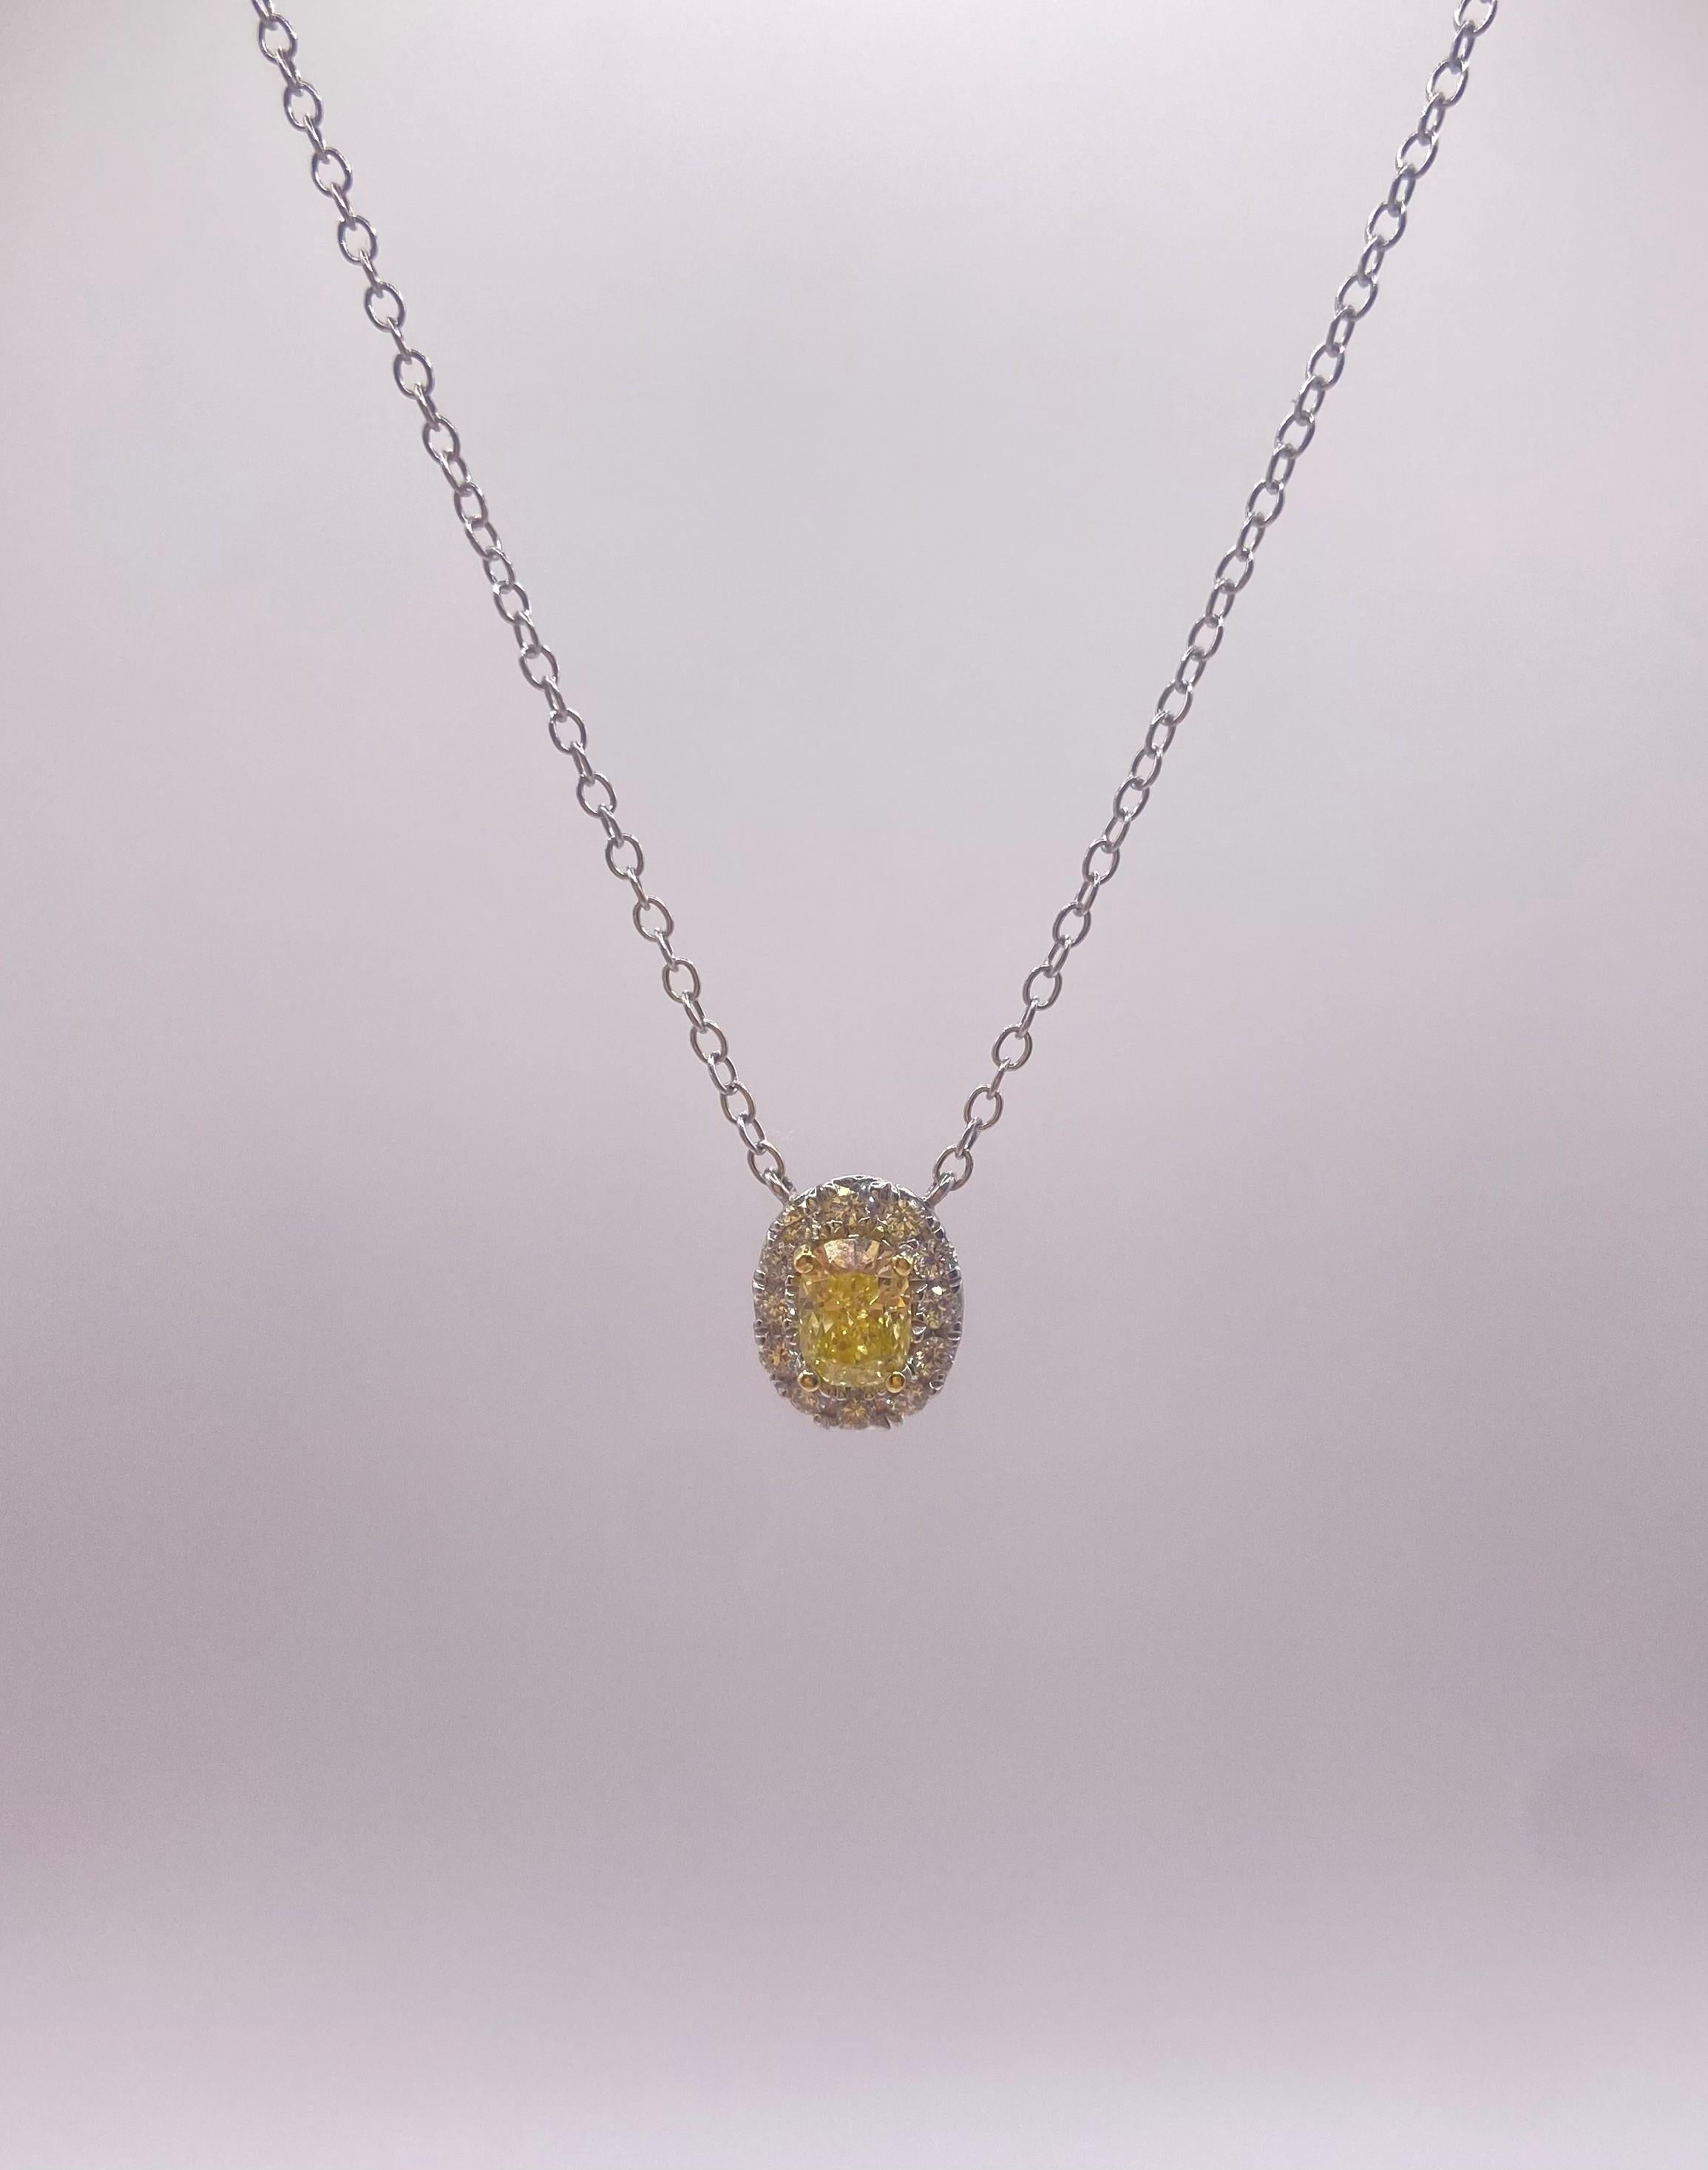 Metal: 18KT Two Tone
Total Carat Weight: 0.87ctw
Chain Length: 16